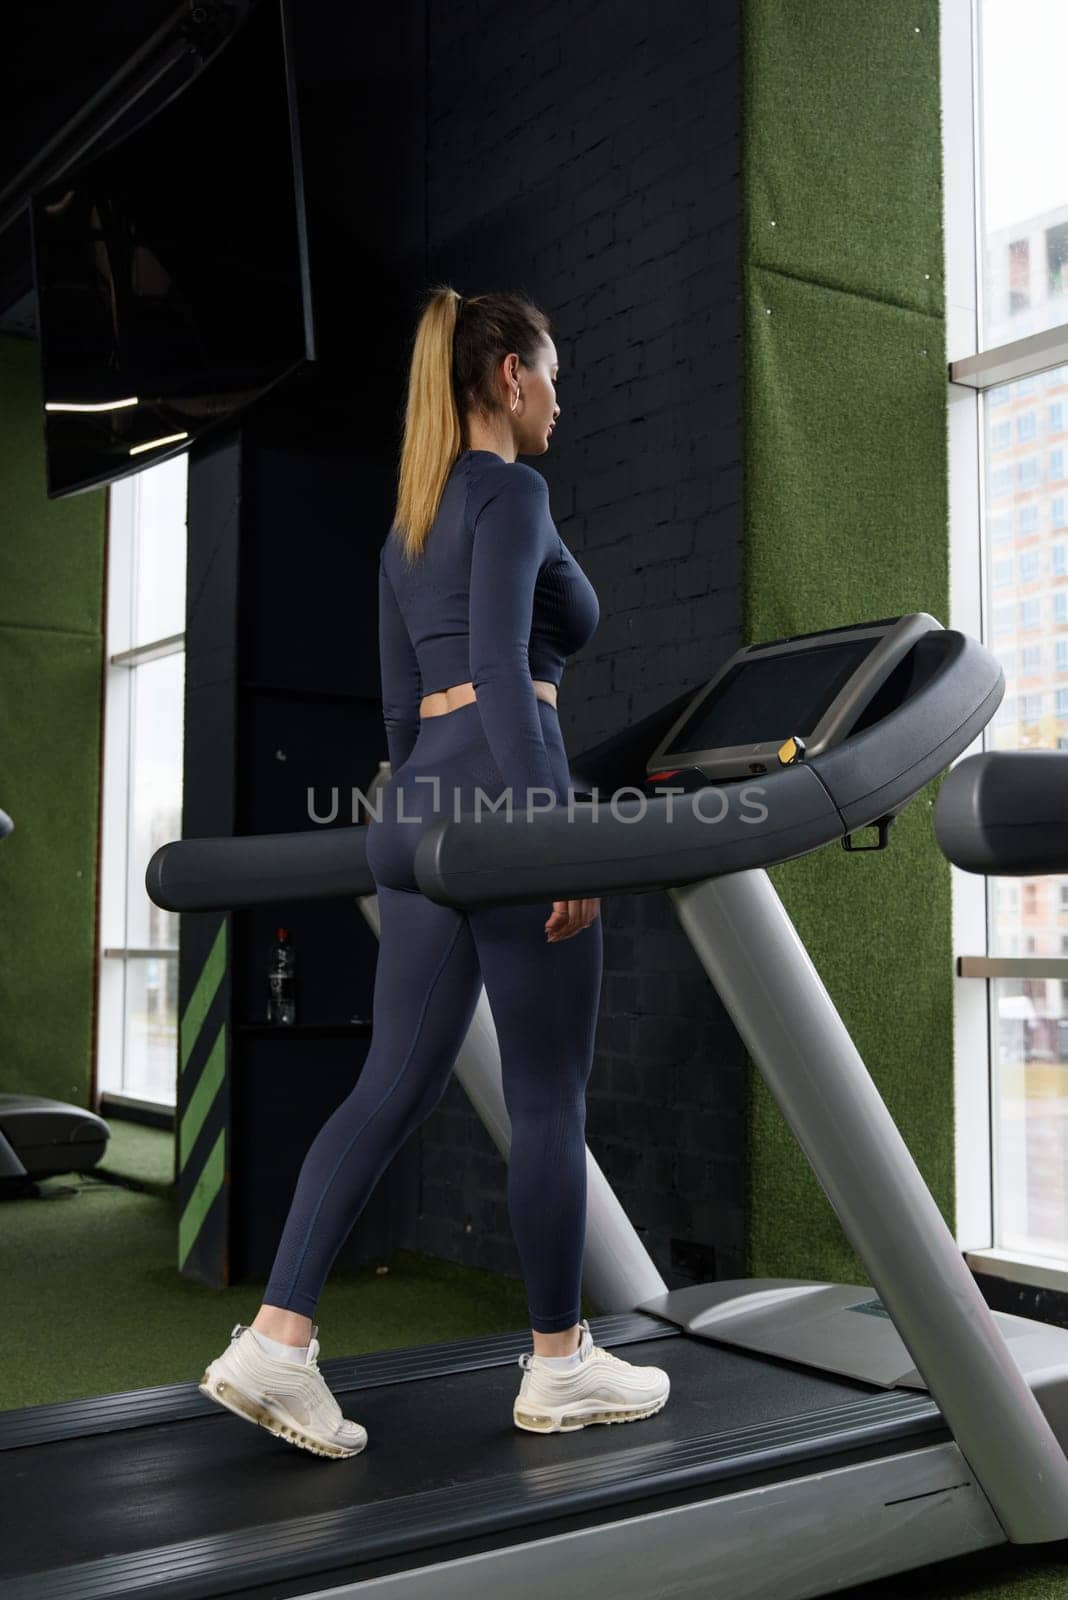 Beautiful muscular woman on a treadmill. wearing blue leggins and long sleeve top.